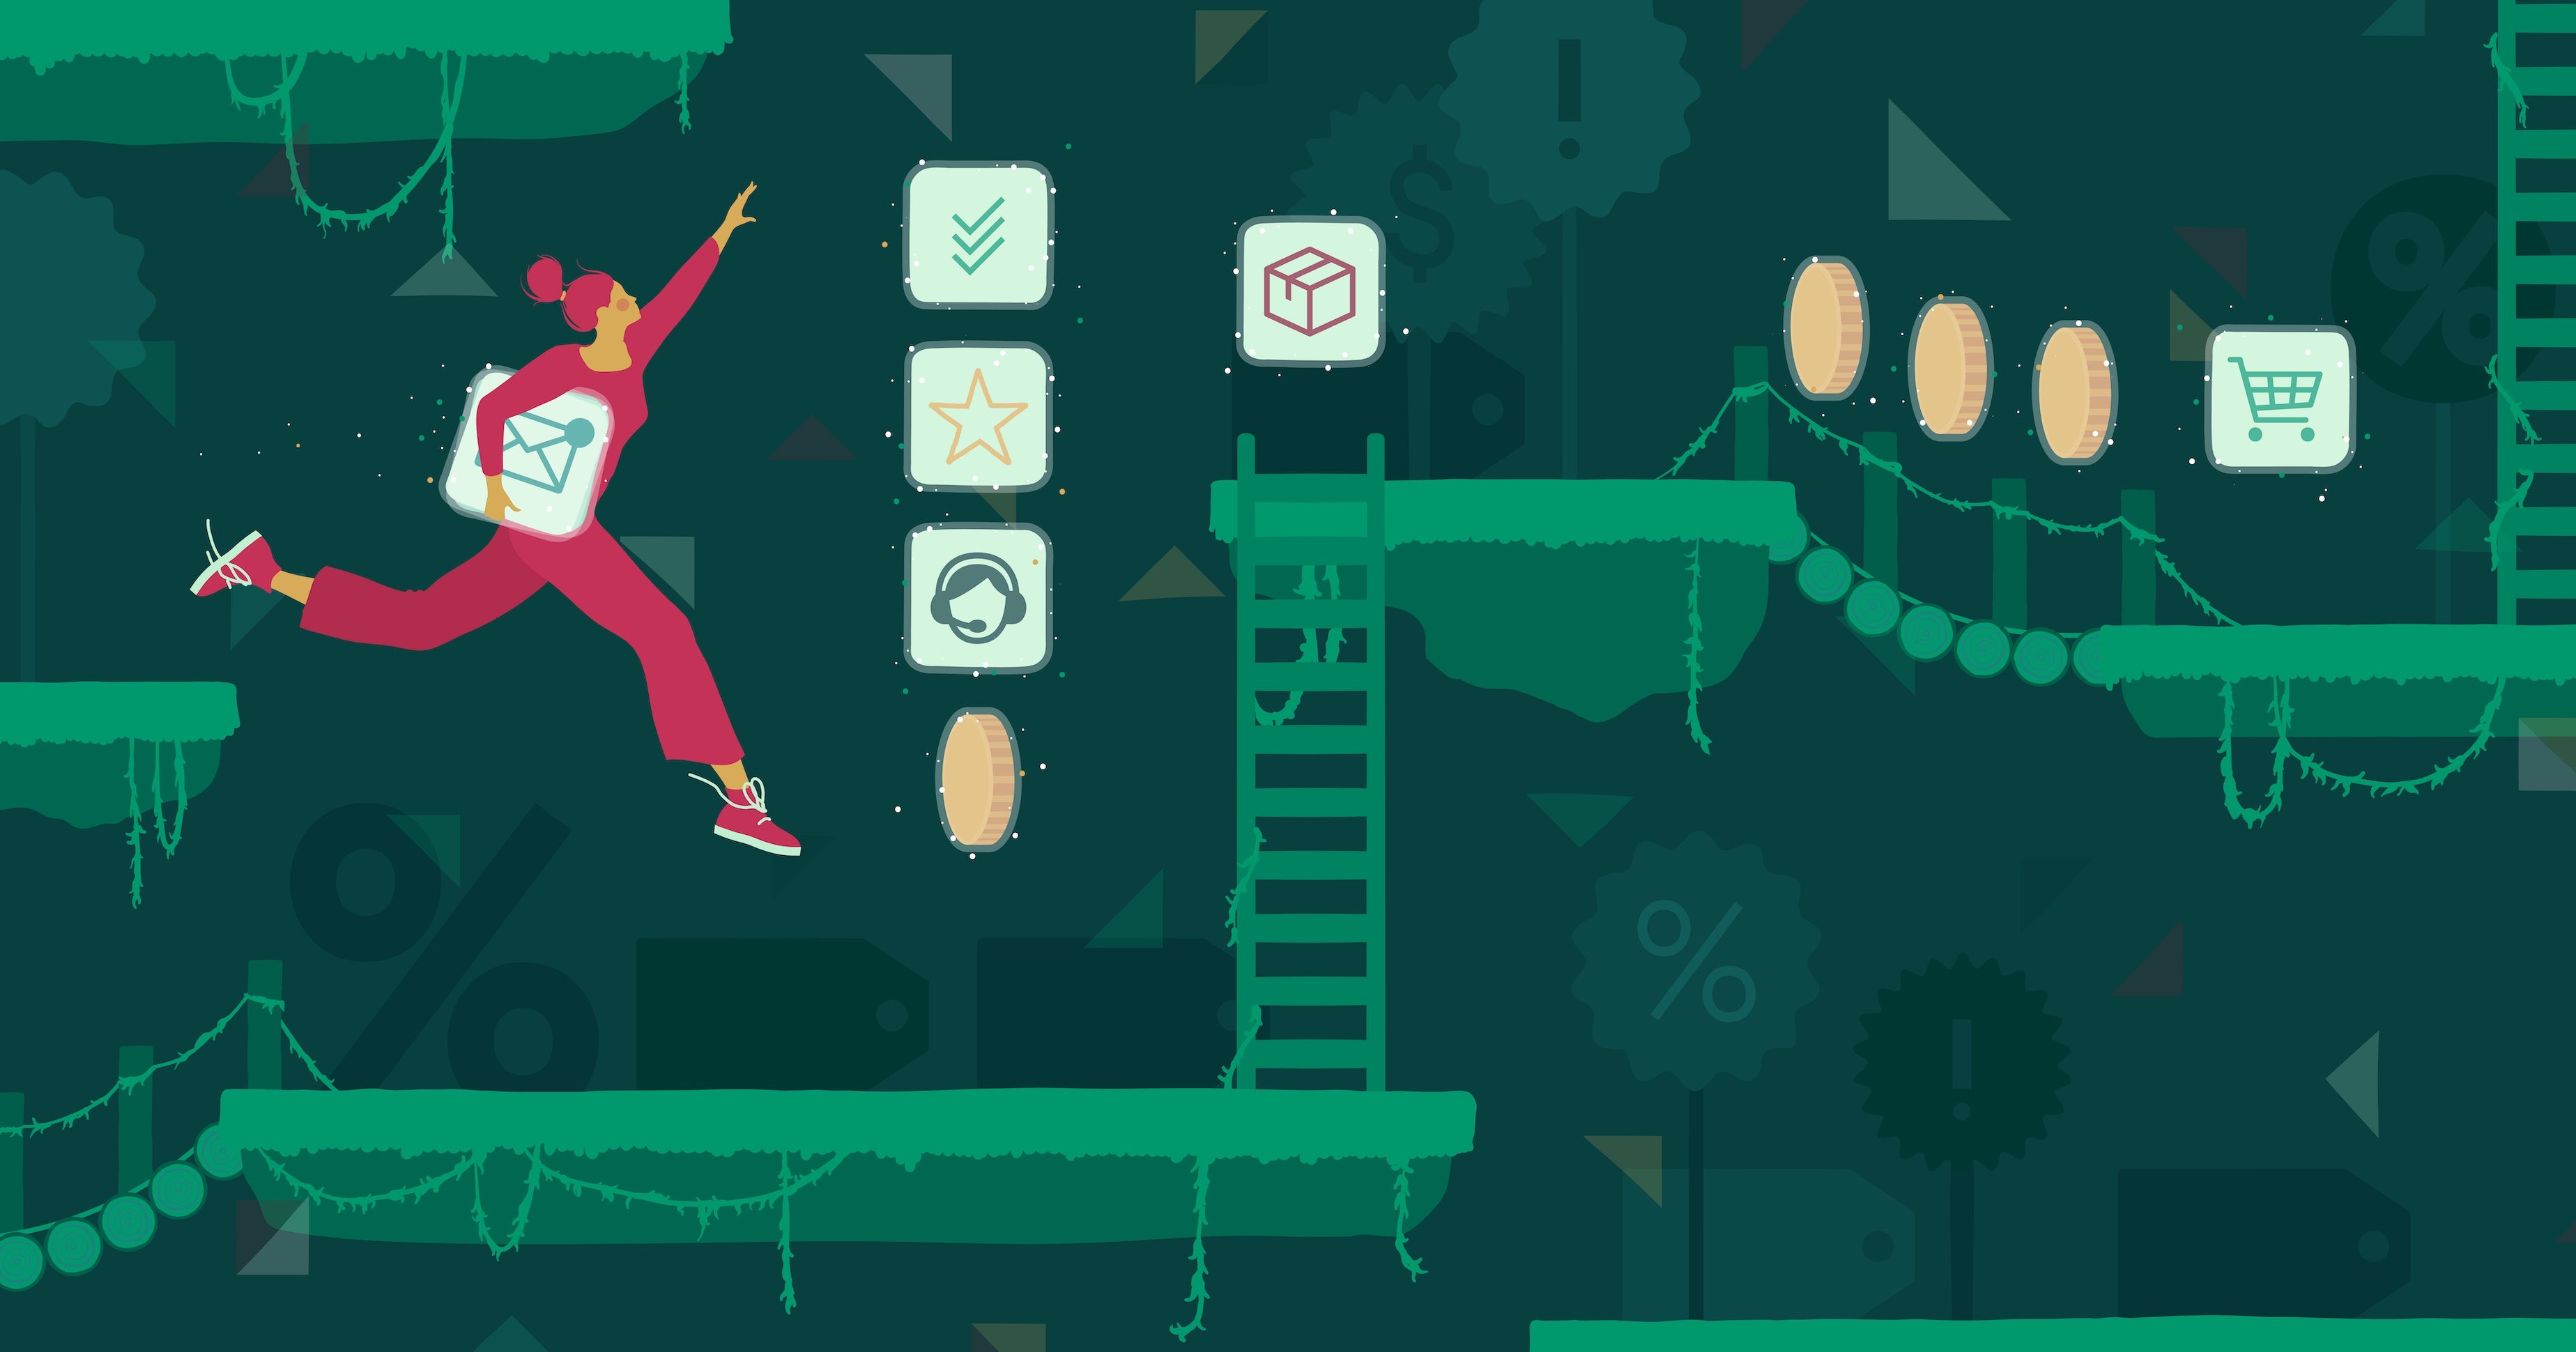 Illustration of a woman navigating obstacles in a video game and collecting apps